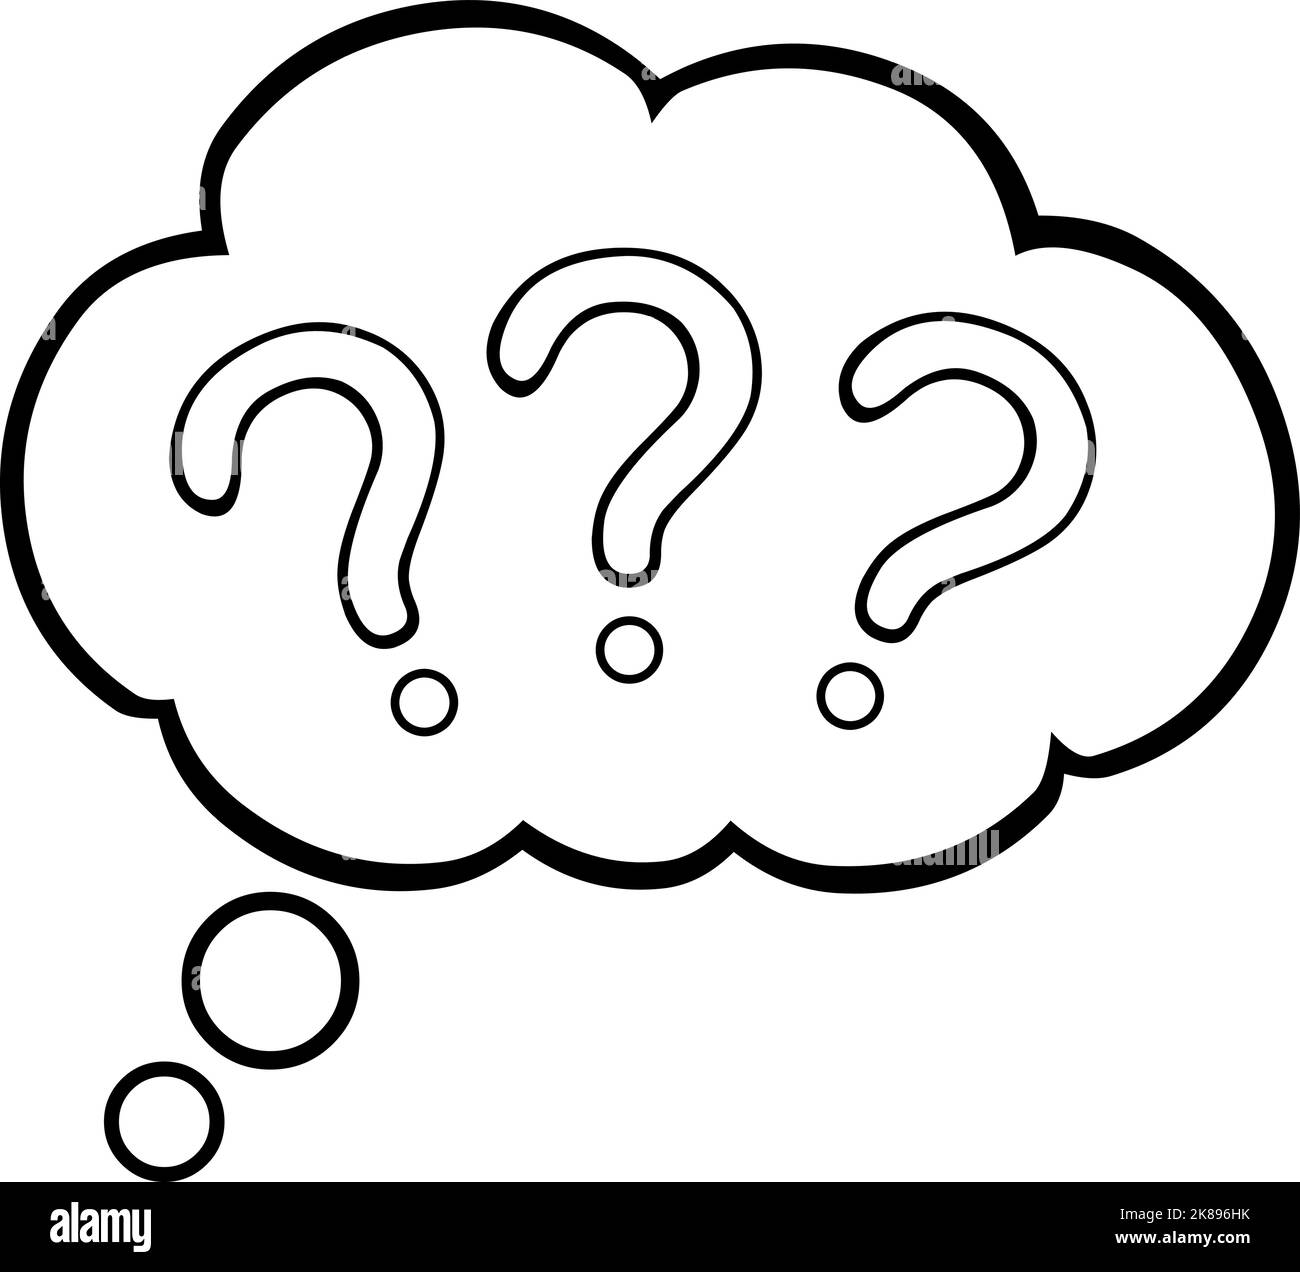 Vector illustration of a cloud of thoughts with question marks, drawn in black and white Stock Vector